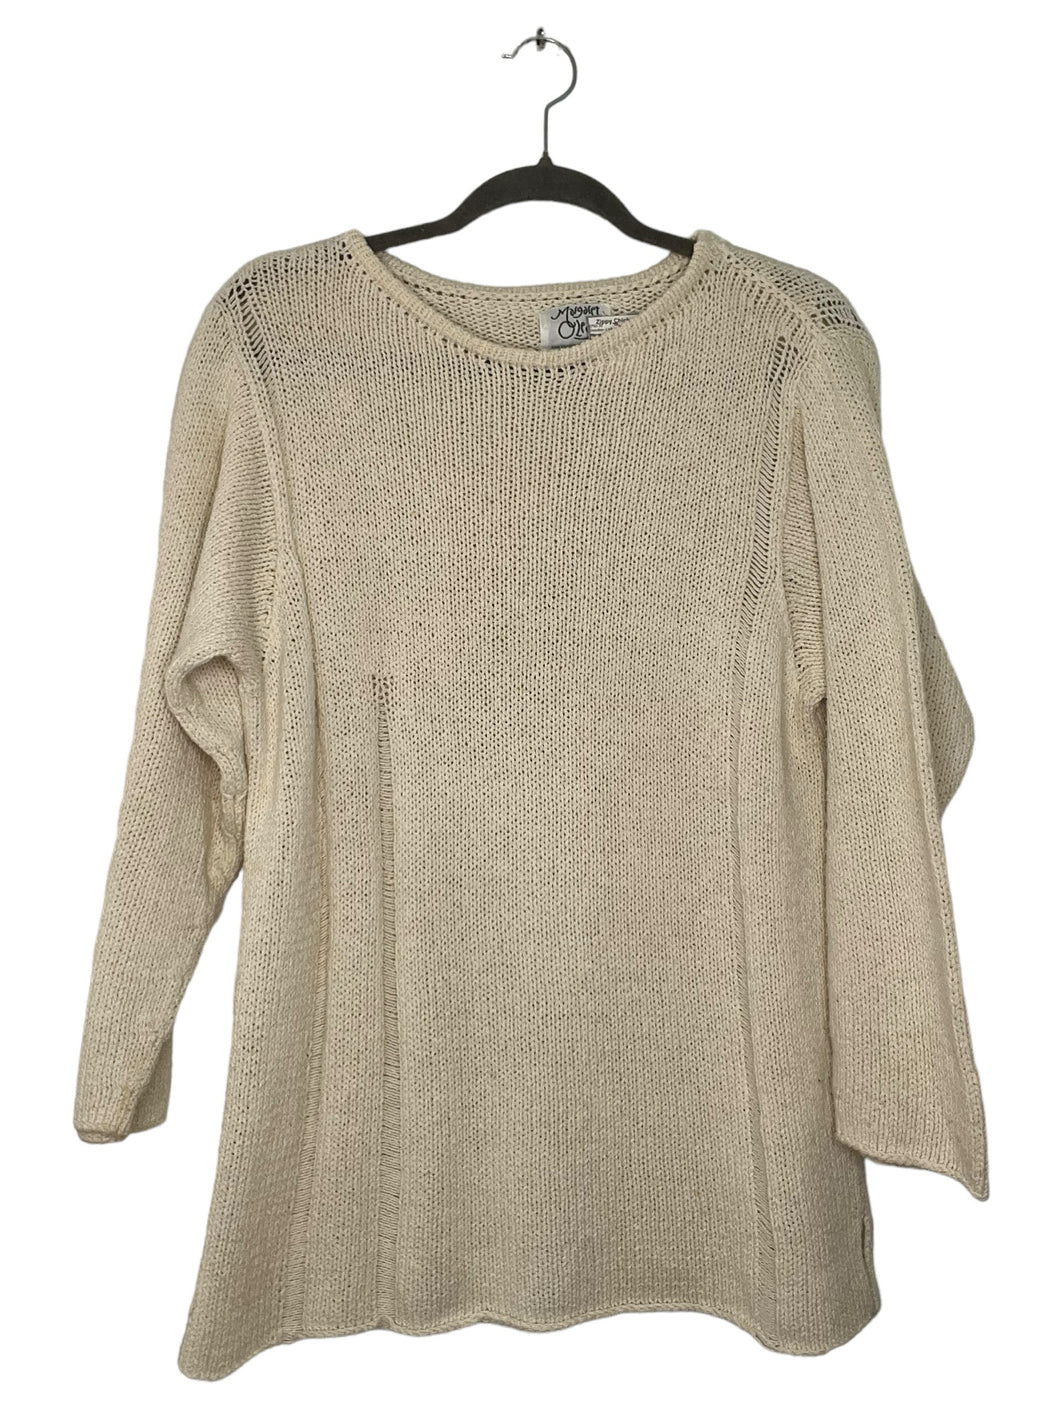 Margaret O'Leary Size S/M Cream Sweater- Ladies